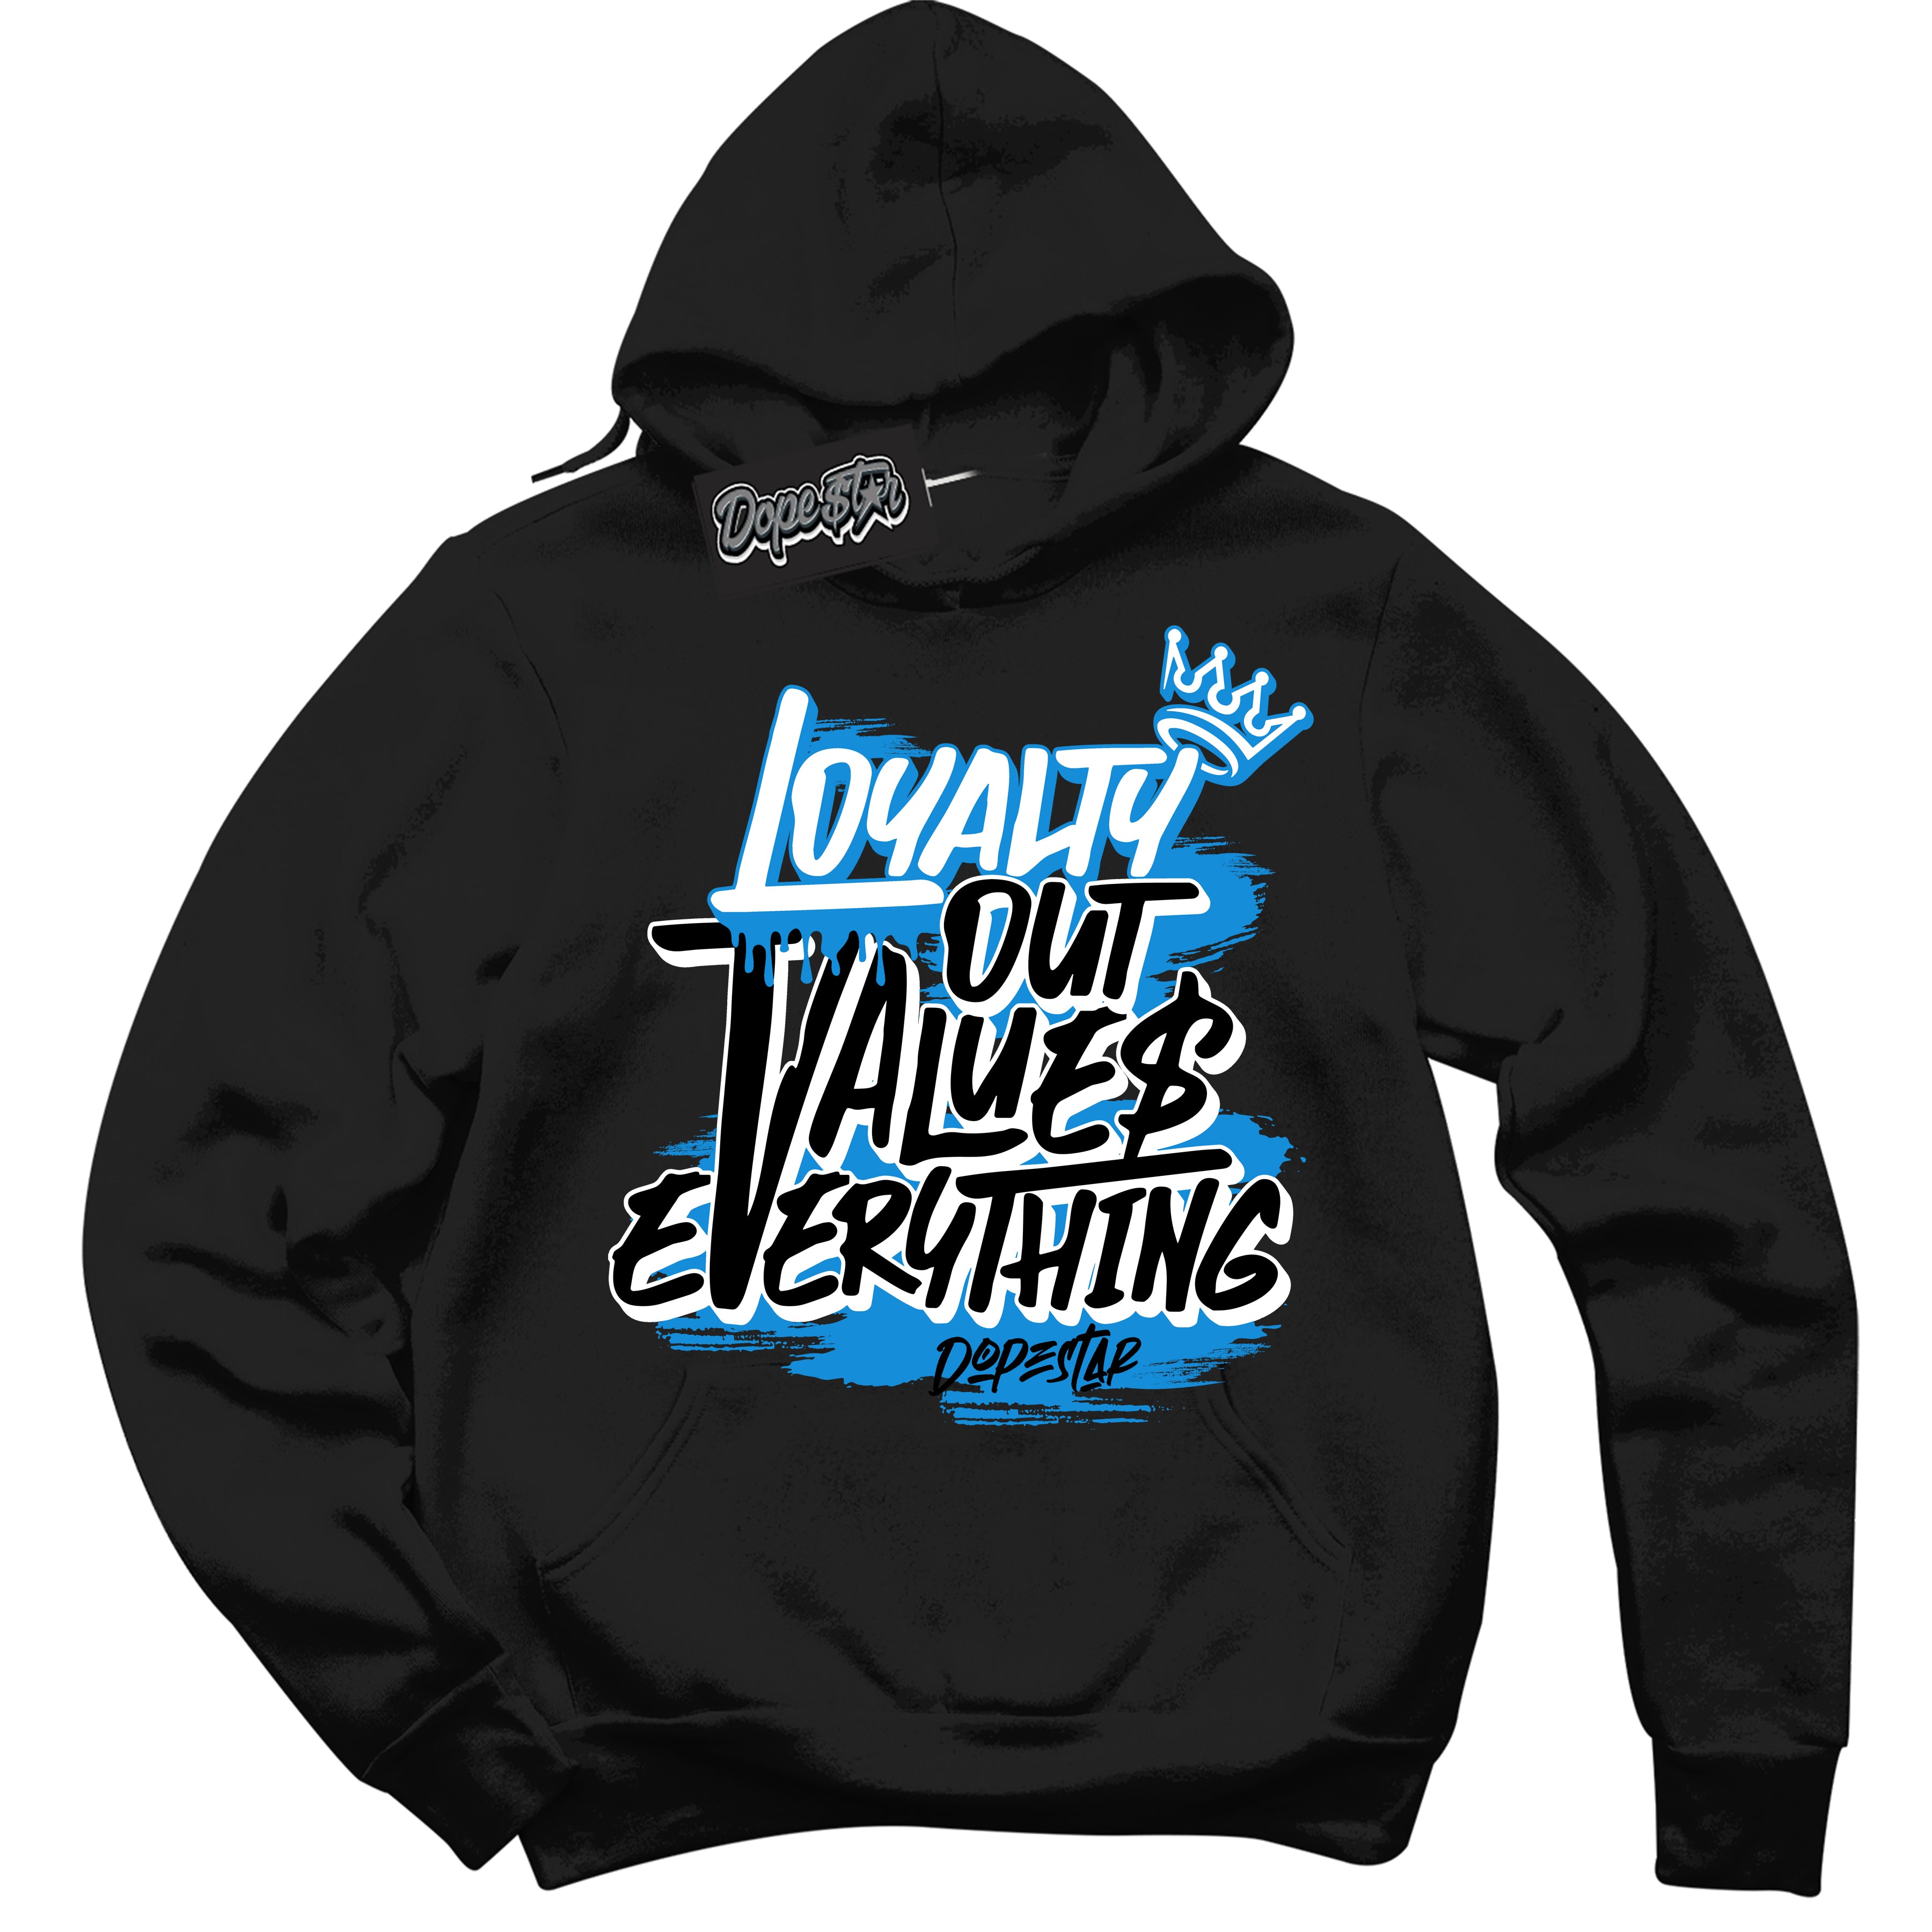 Cool Black Hoodie with “ Loyalty Out Values Everything ”  design that Perfectly Matches  Powder Blue 9s Sneakers.